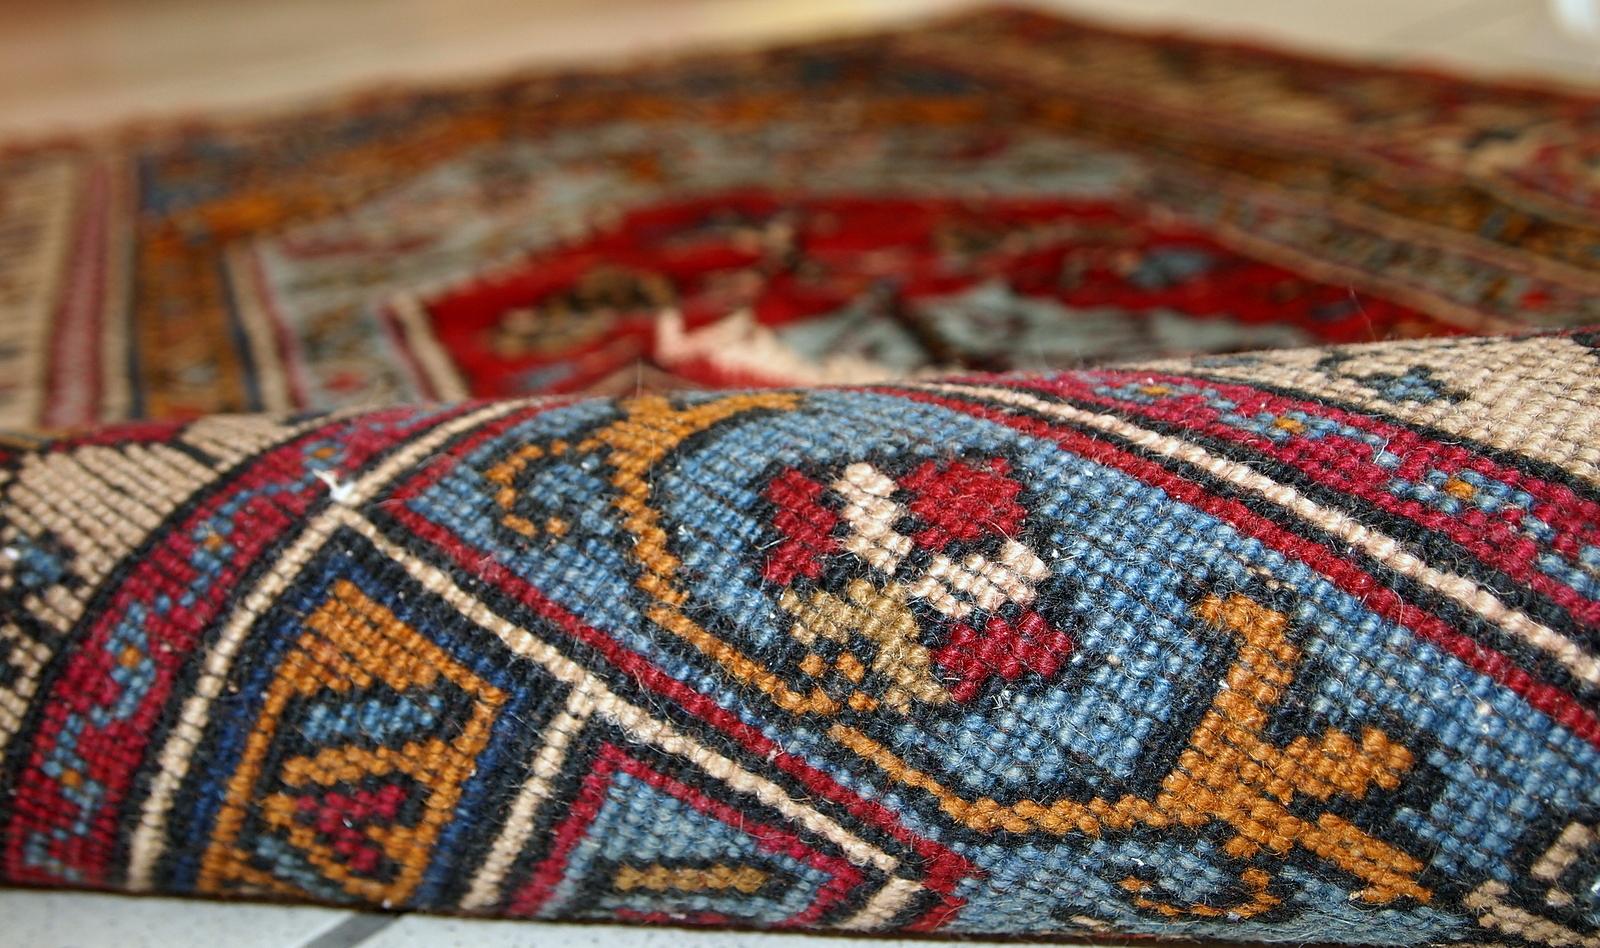 This vintage prayer Turkish rug made in colorful shades of wool. The rug is quite thick and soft. Beautiful beige border with colorful houses on it. The rug is in original good condition.

-condition: original good,

-circa: 1950s,

-size: